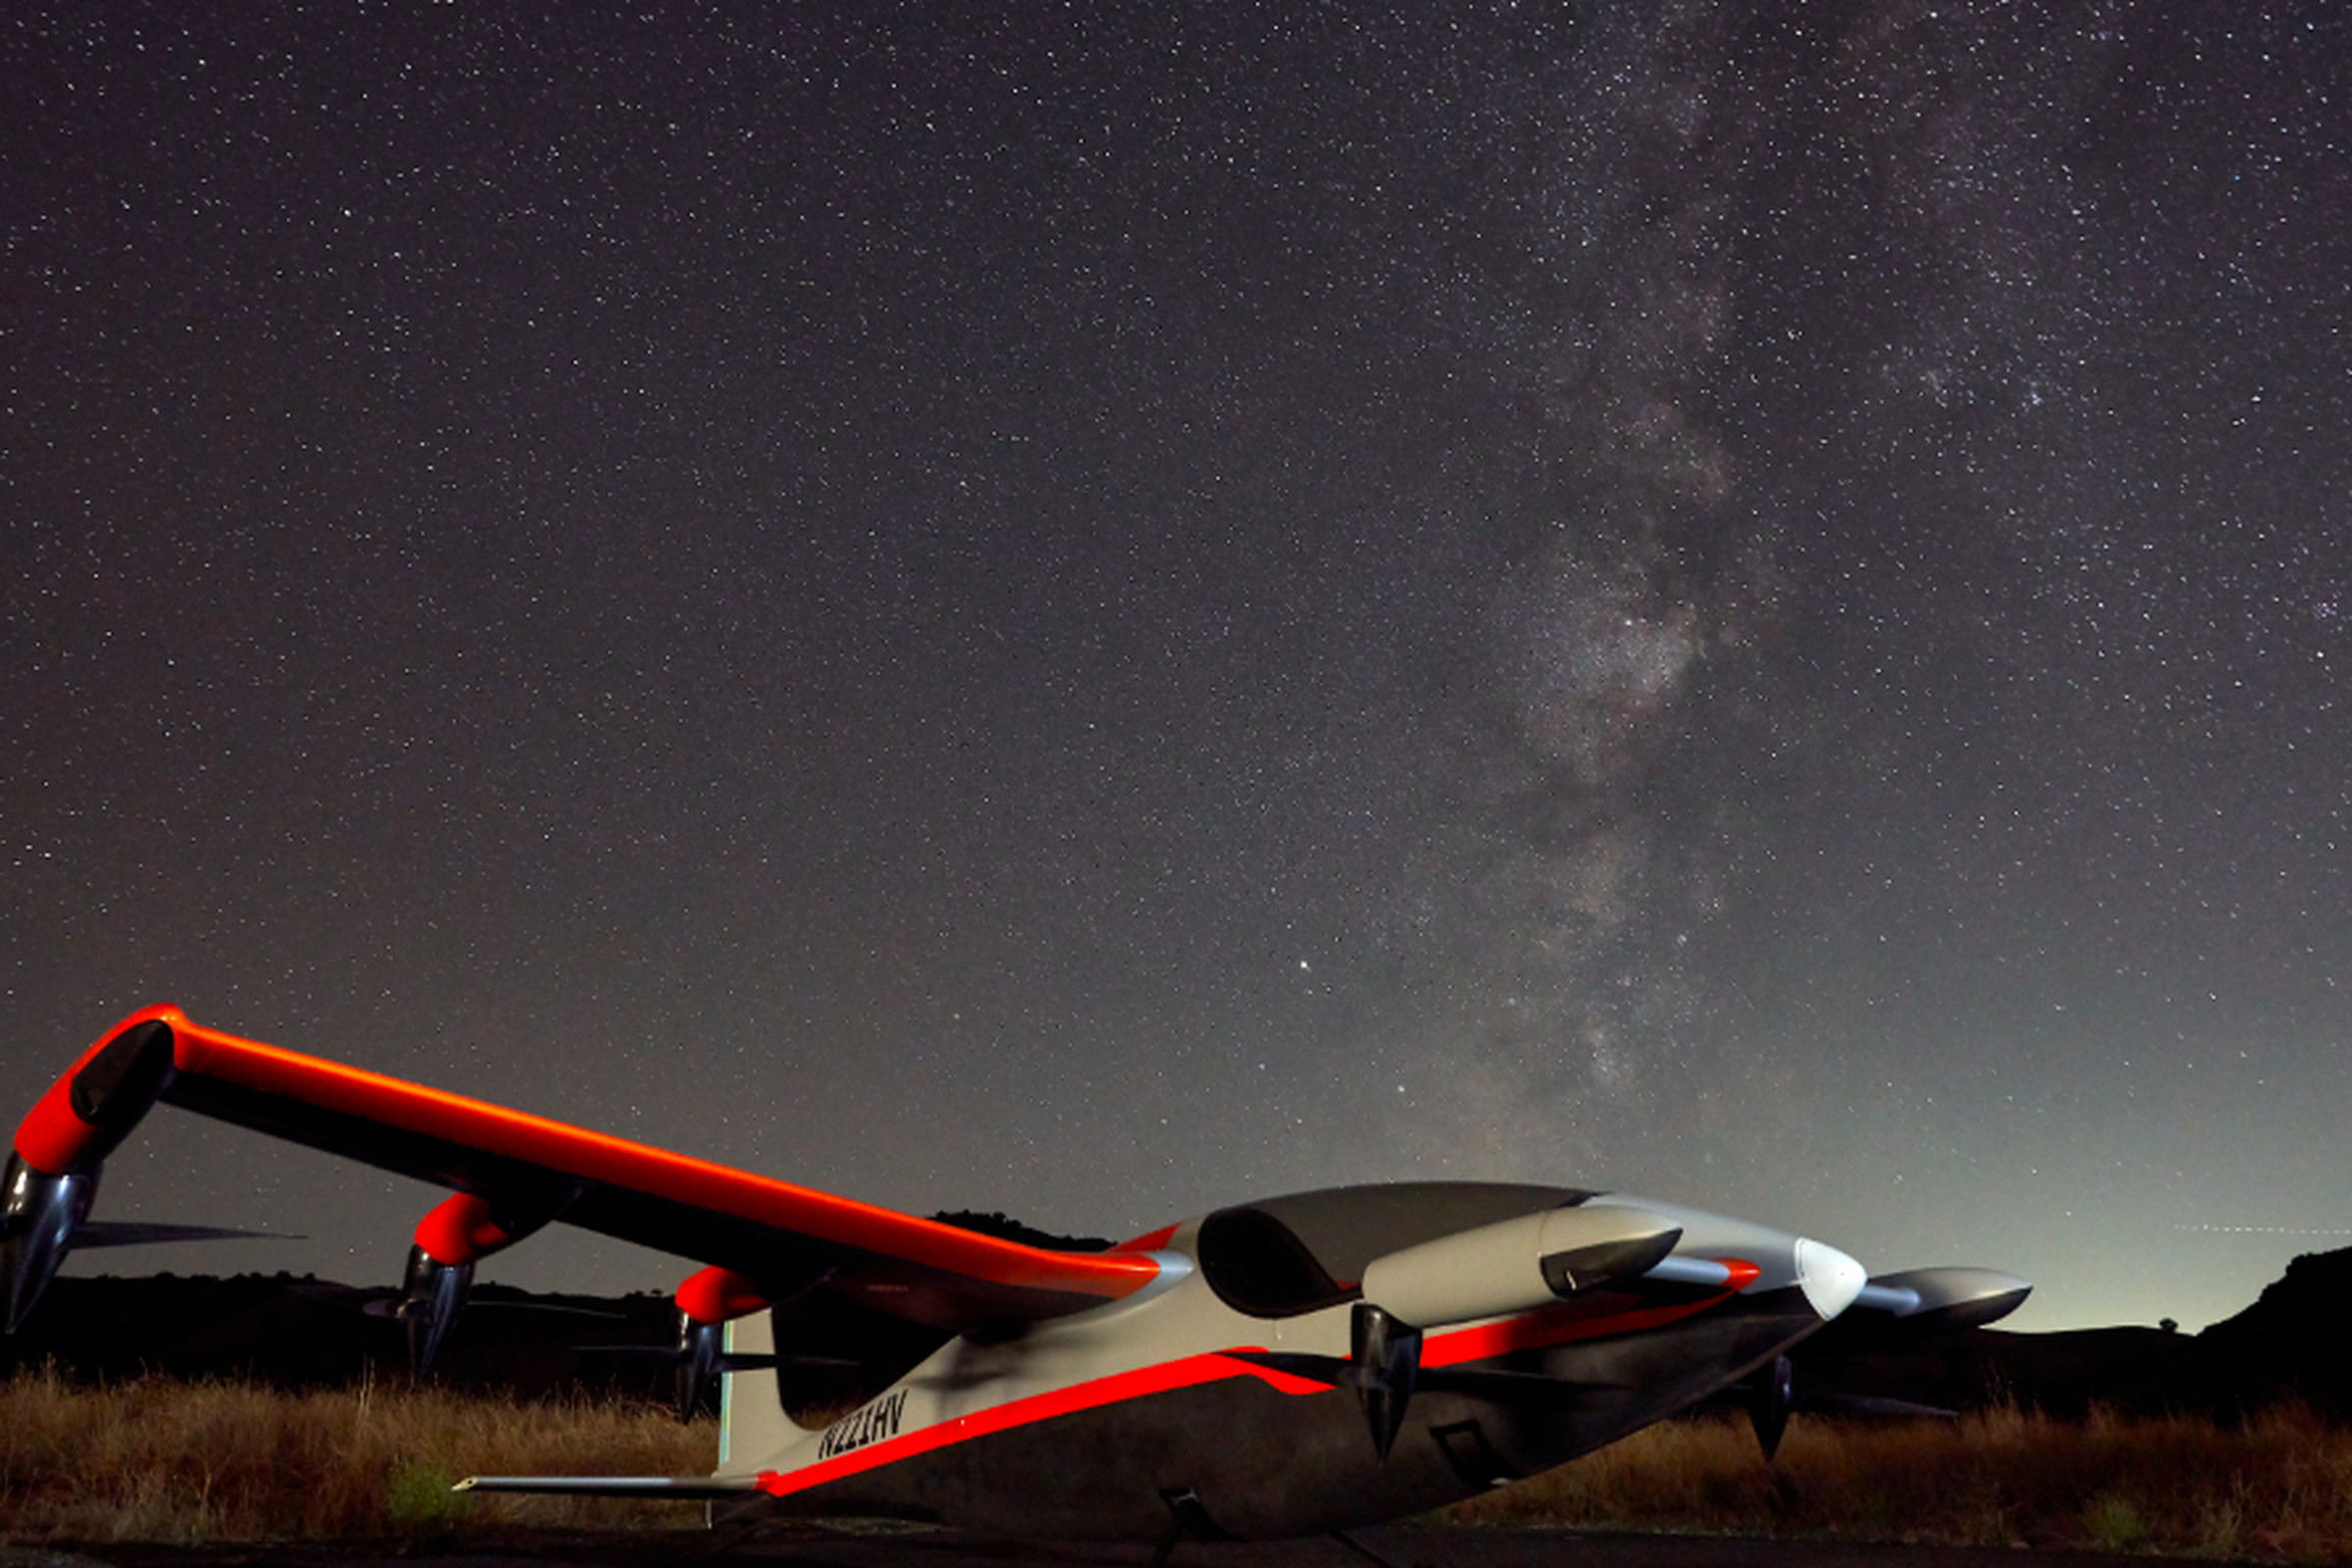 In a clear and starry night sky, a red charter-sized aircraft stands.